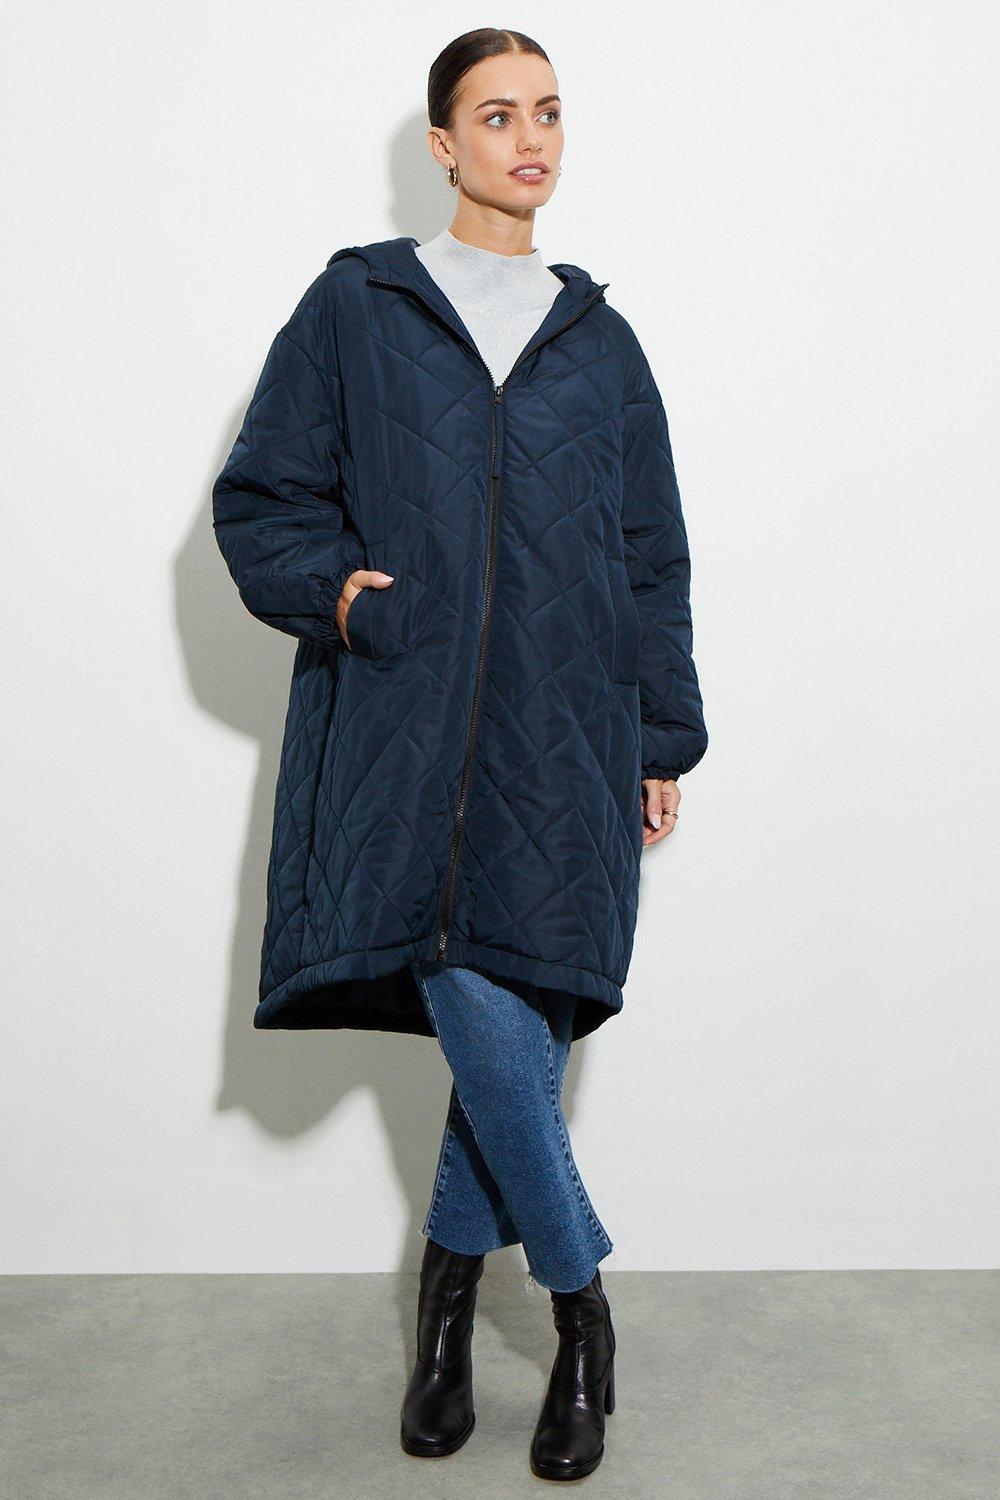 Women’s Petite Oversized Hooded Diamond Quilted Parka Coat - navy - S